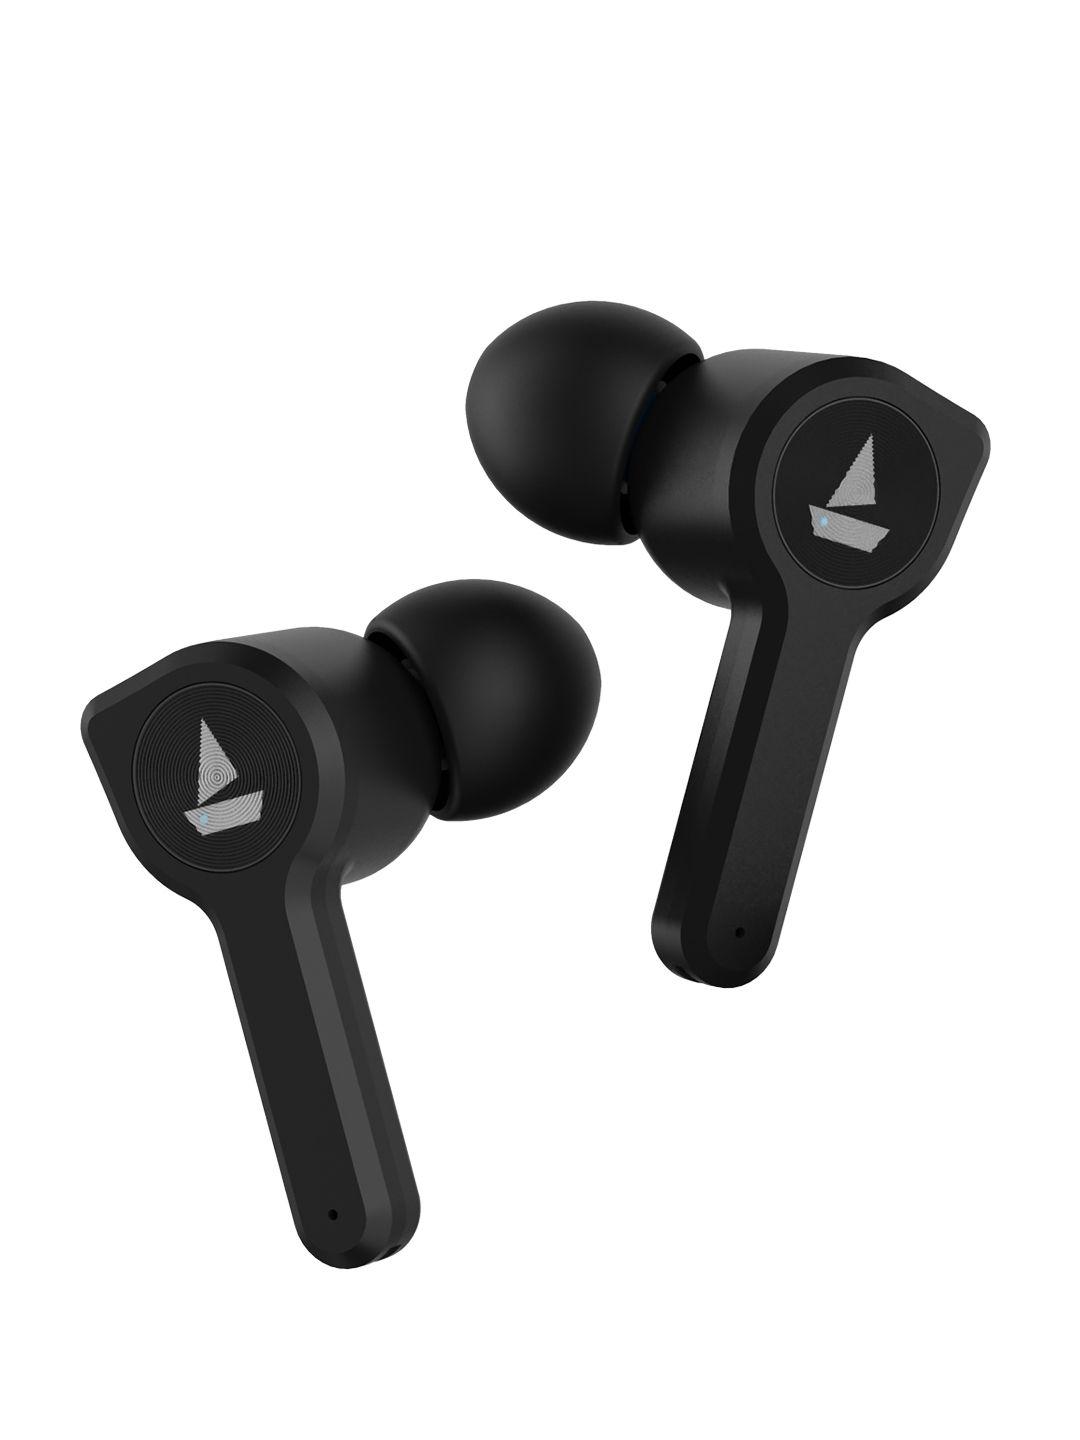 boat-airdopes-402-active-black-tws-earbuds-with-touch-controls-immersive-audio